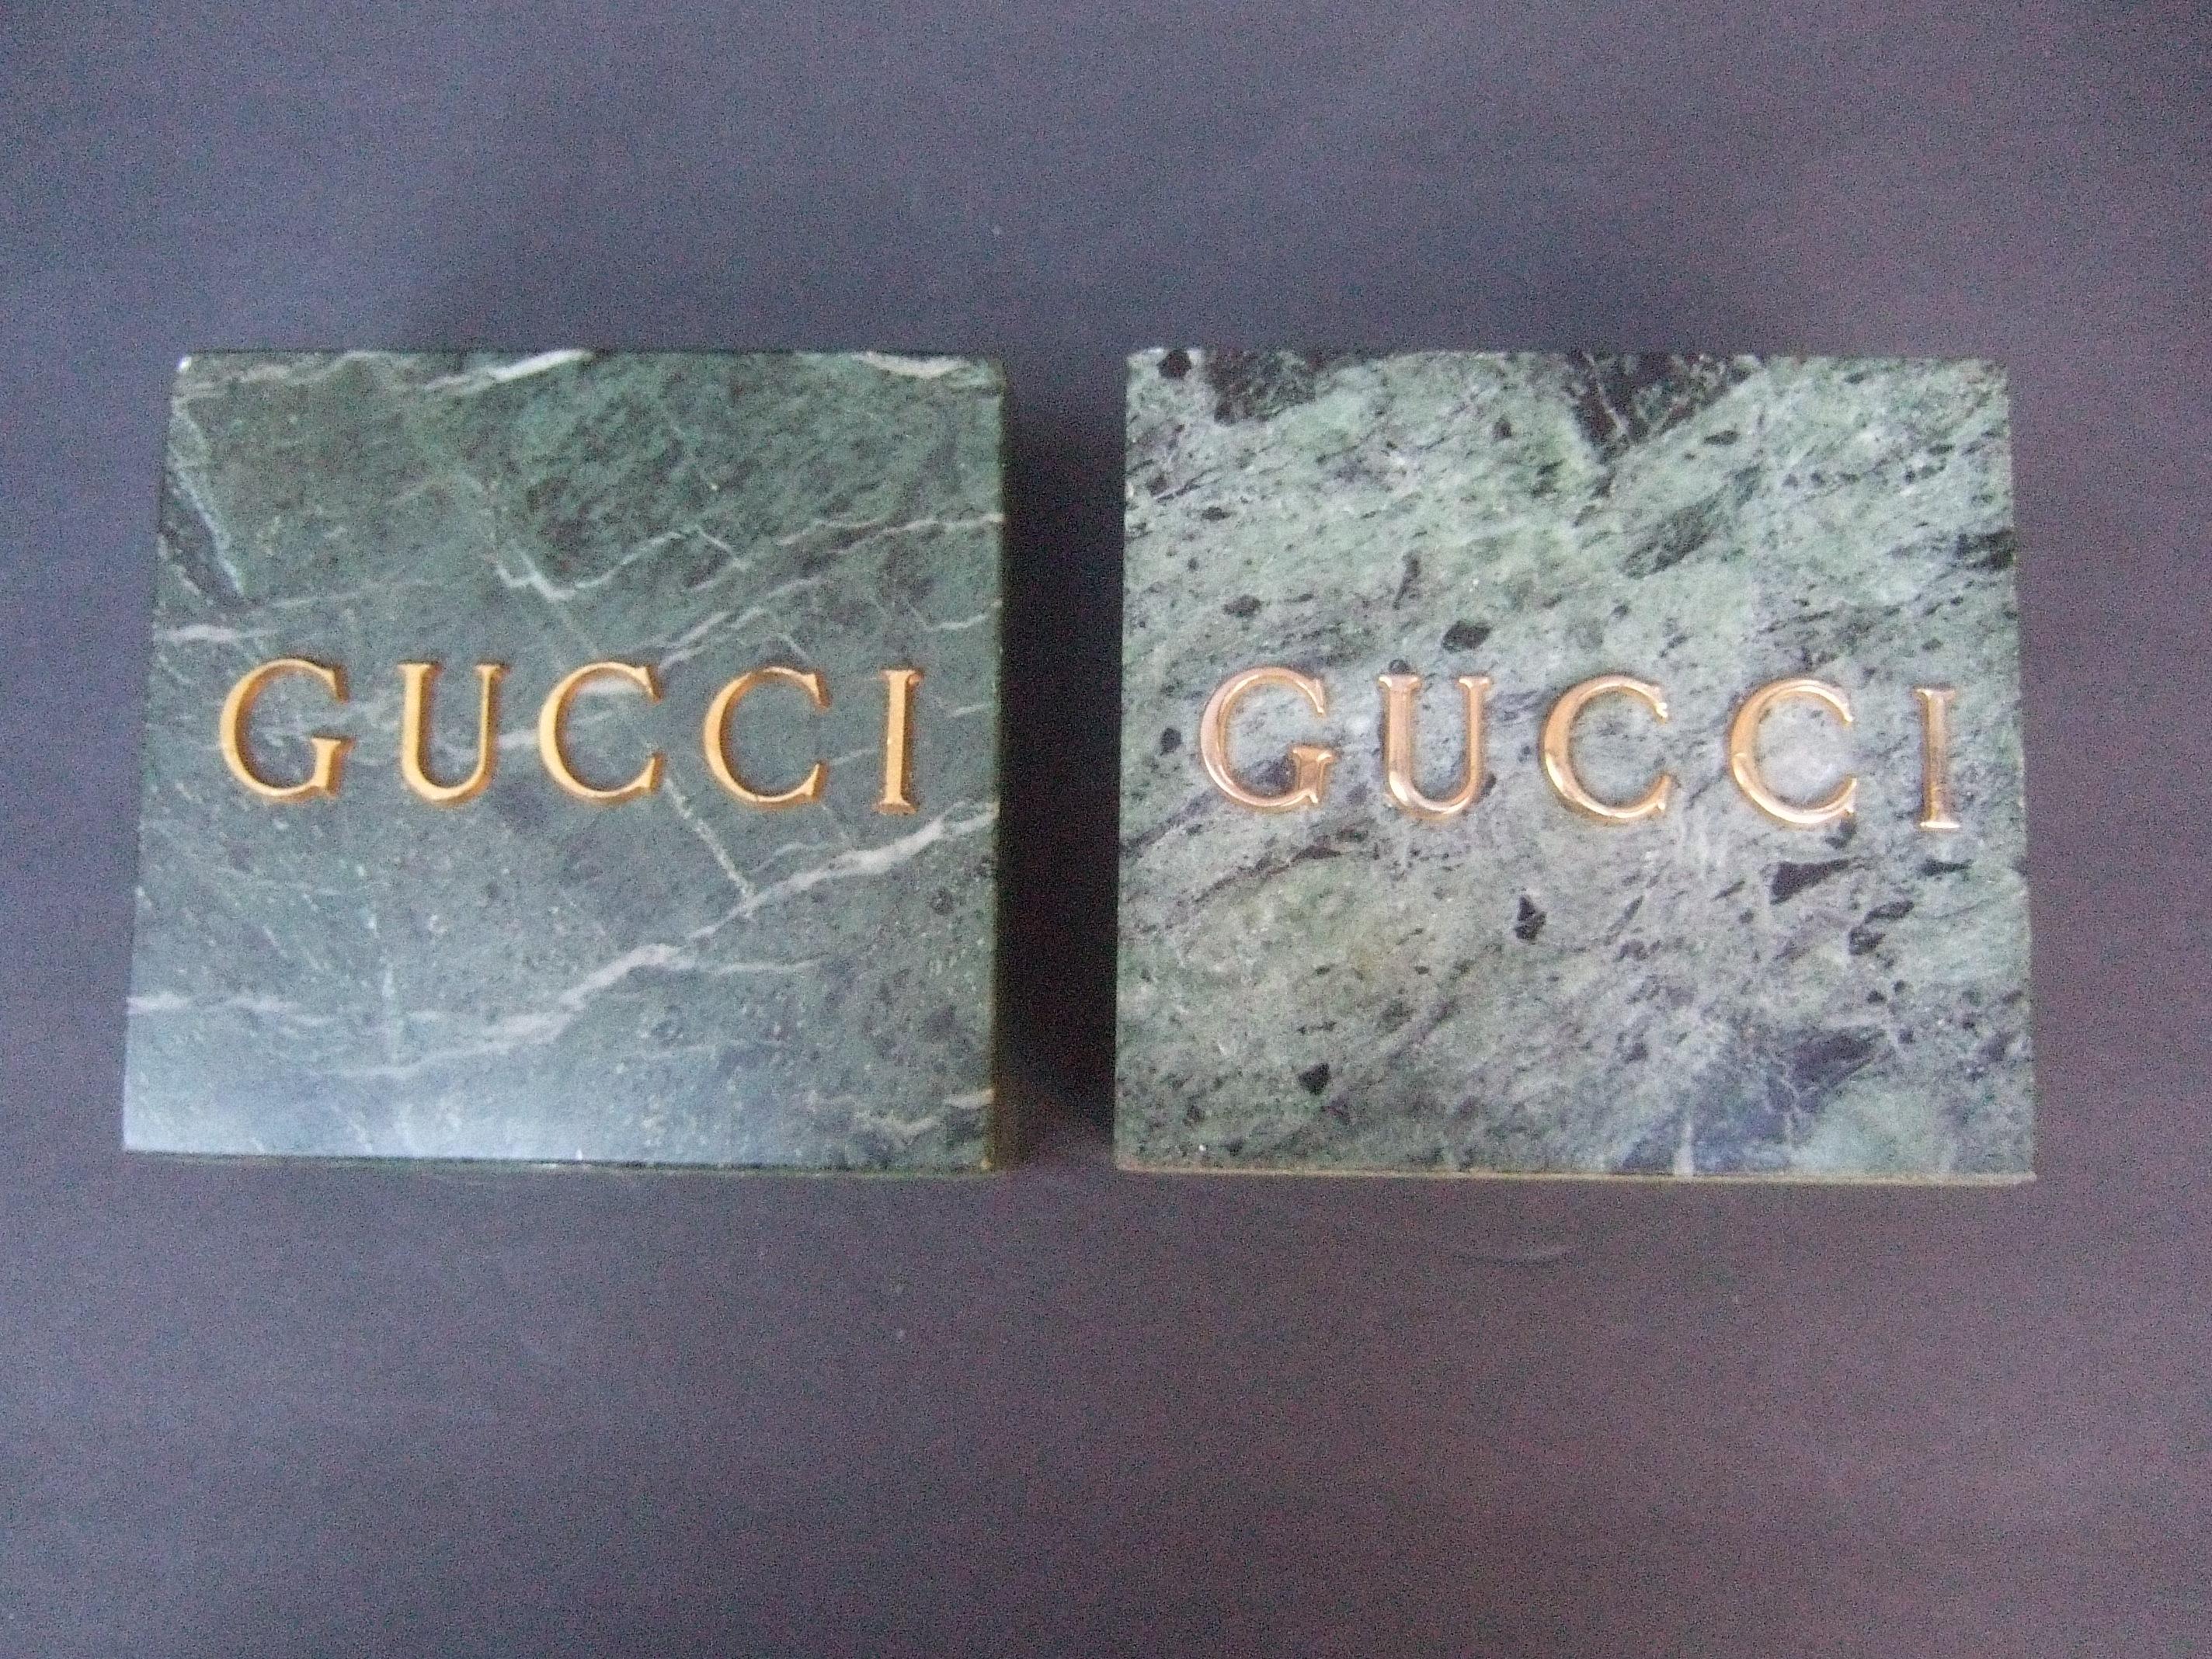 Gucci pair of muted green marble stone bookends / decorative objects c 1970s
The sleek pair of green marble blocks were originally display fixtures at Gucci boutiques in the 1970s and 1980s

The pair of Gucci inscribed marble blocks could be